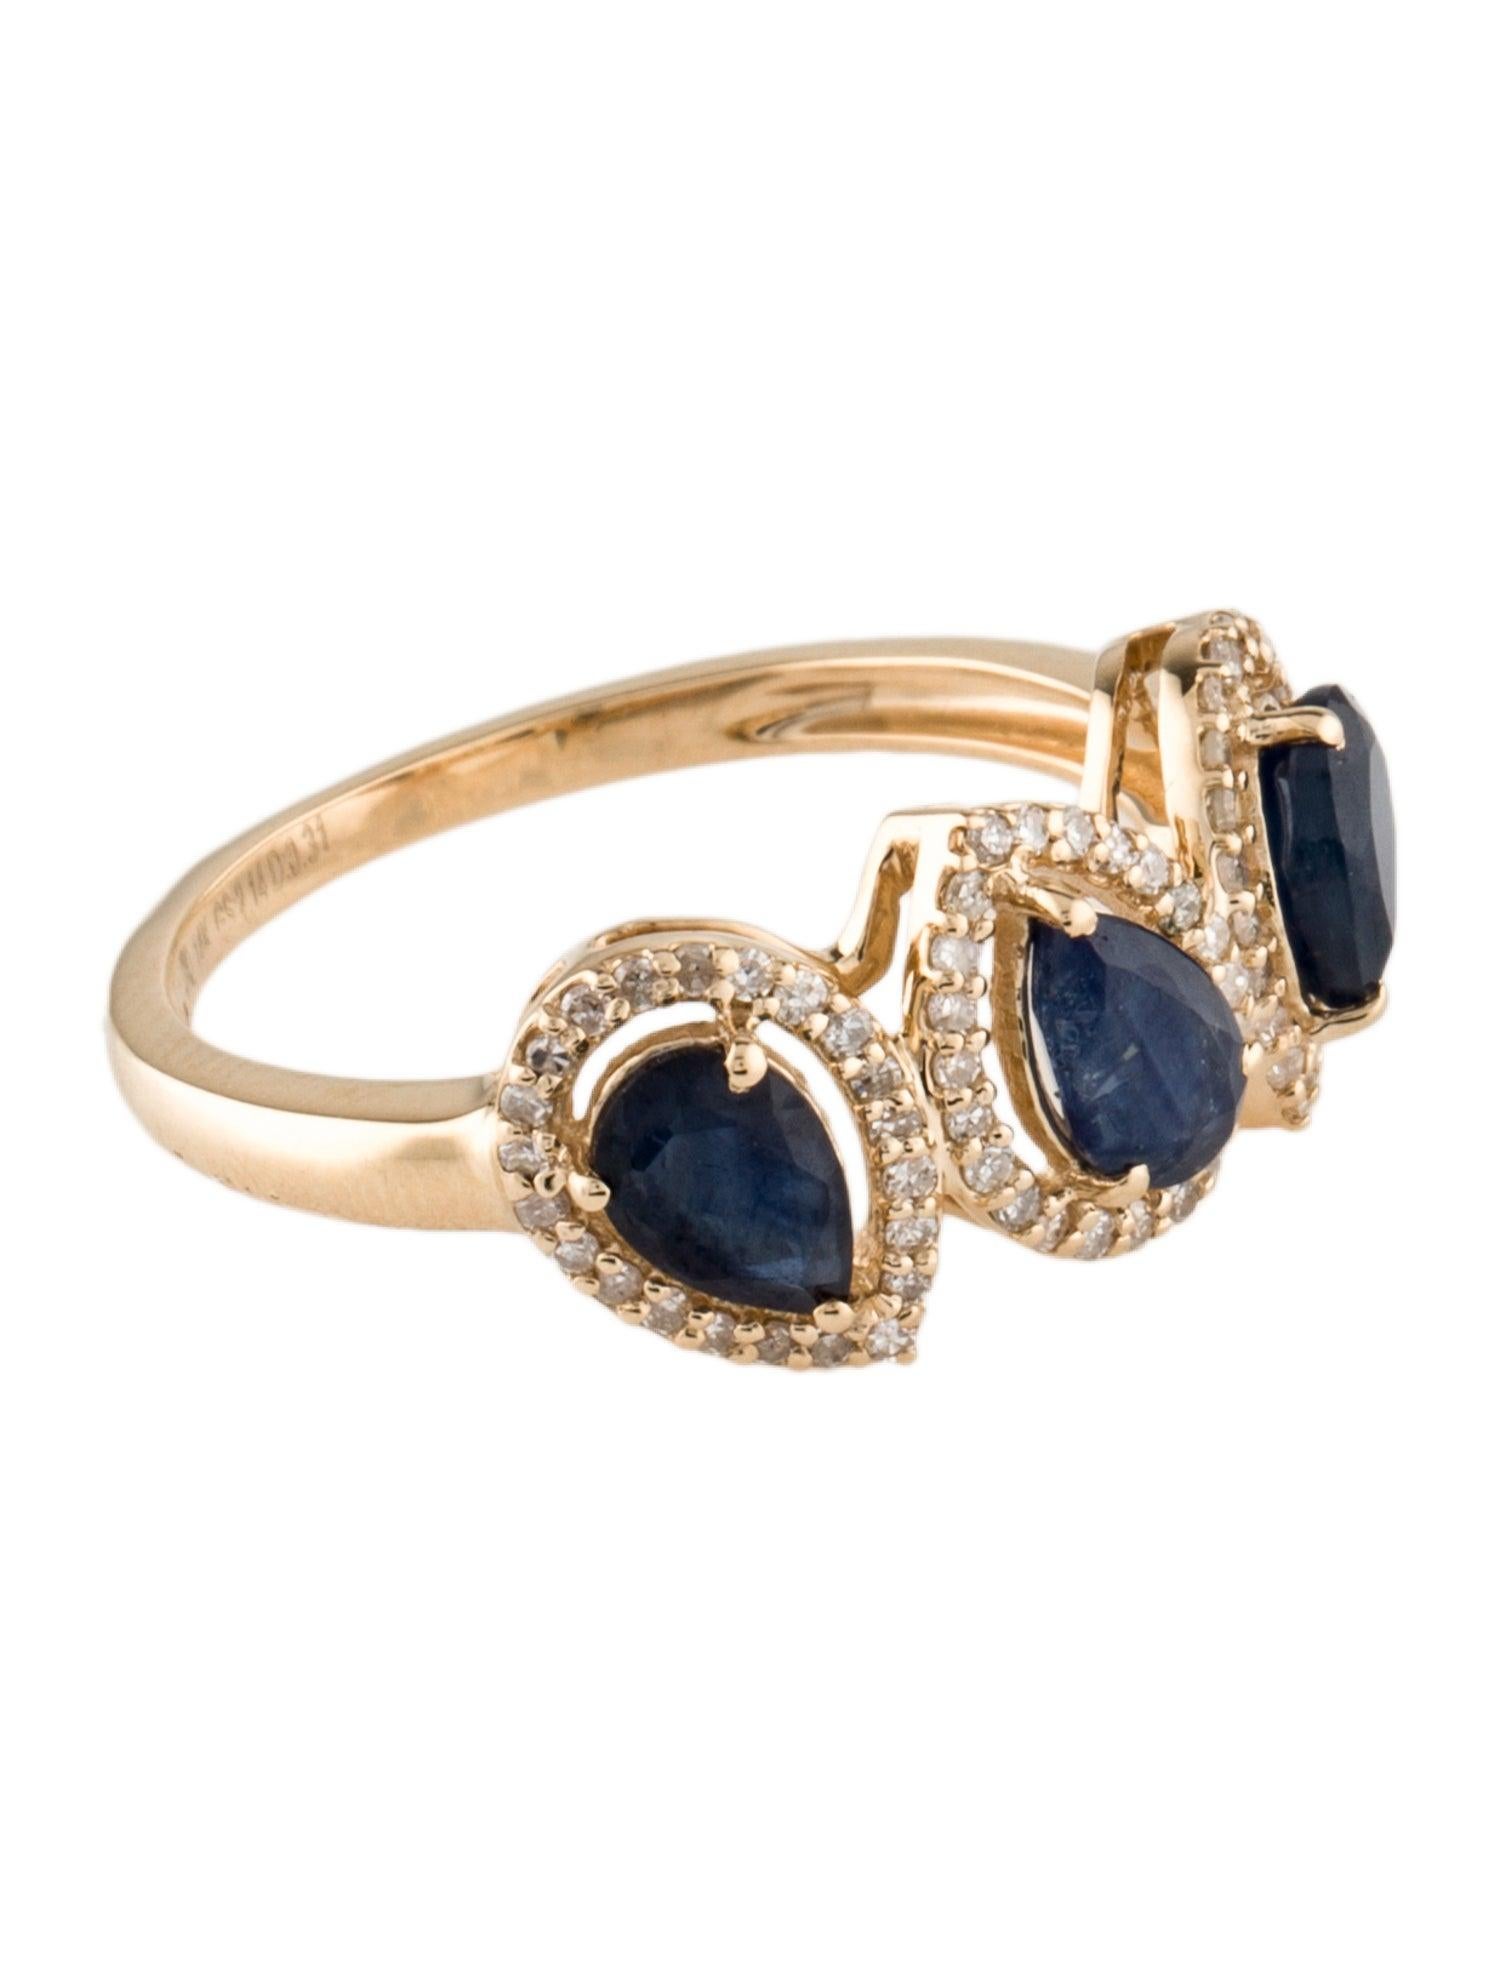 Introducing our exquisite 14K Yellow Gold Sapphire and Diamond Band, a true masterpiece of fine jewelry. This size 8 band elegantly combines 2.14 carats of Pear Modified Brilliant Sapphires with 0.31 carats of near colorless, single-cut diamonds.